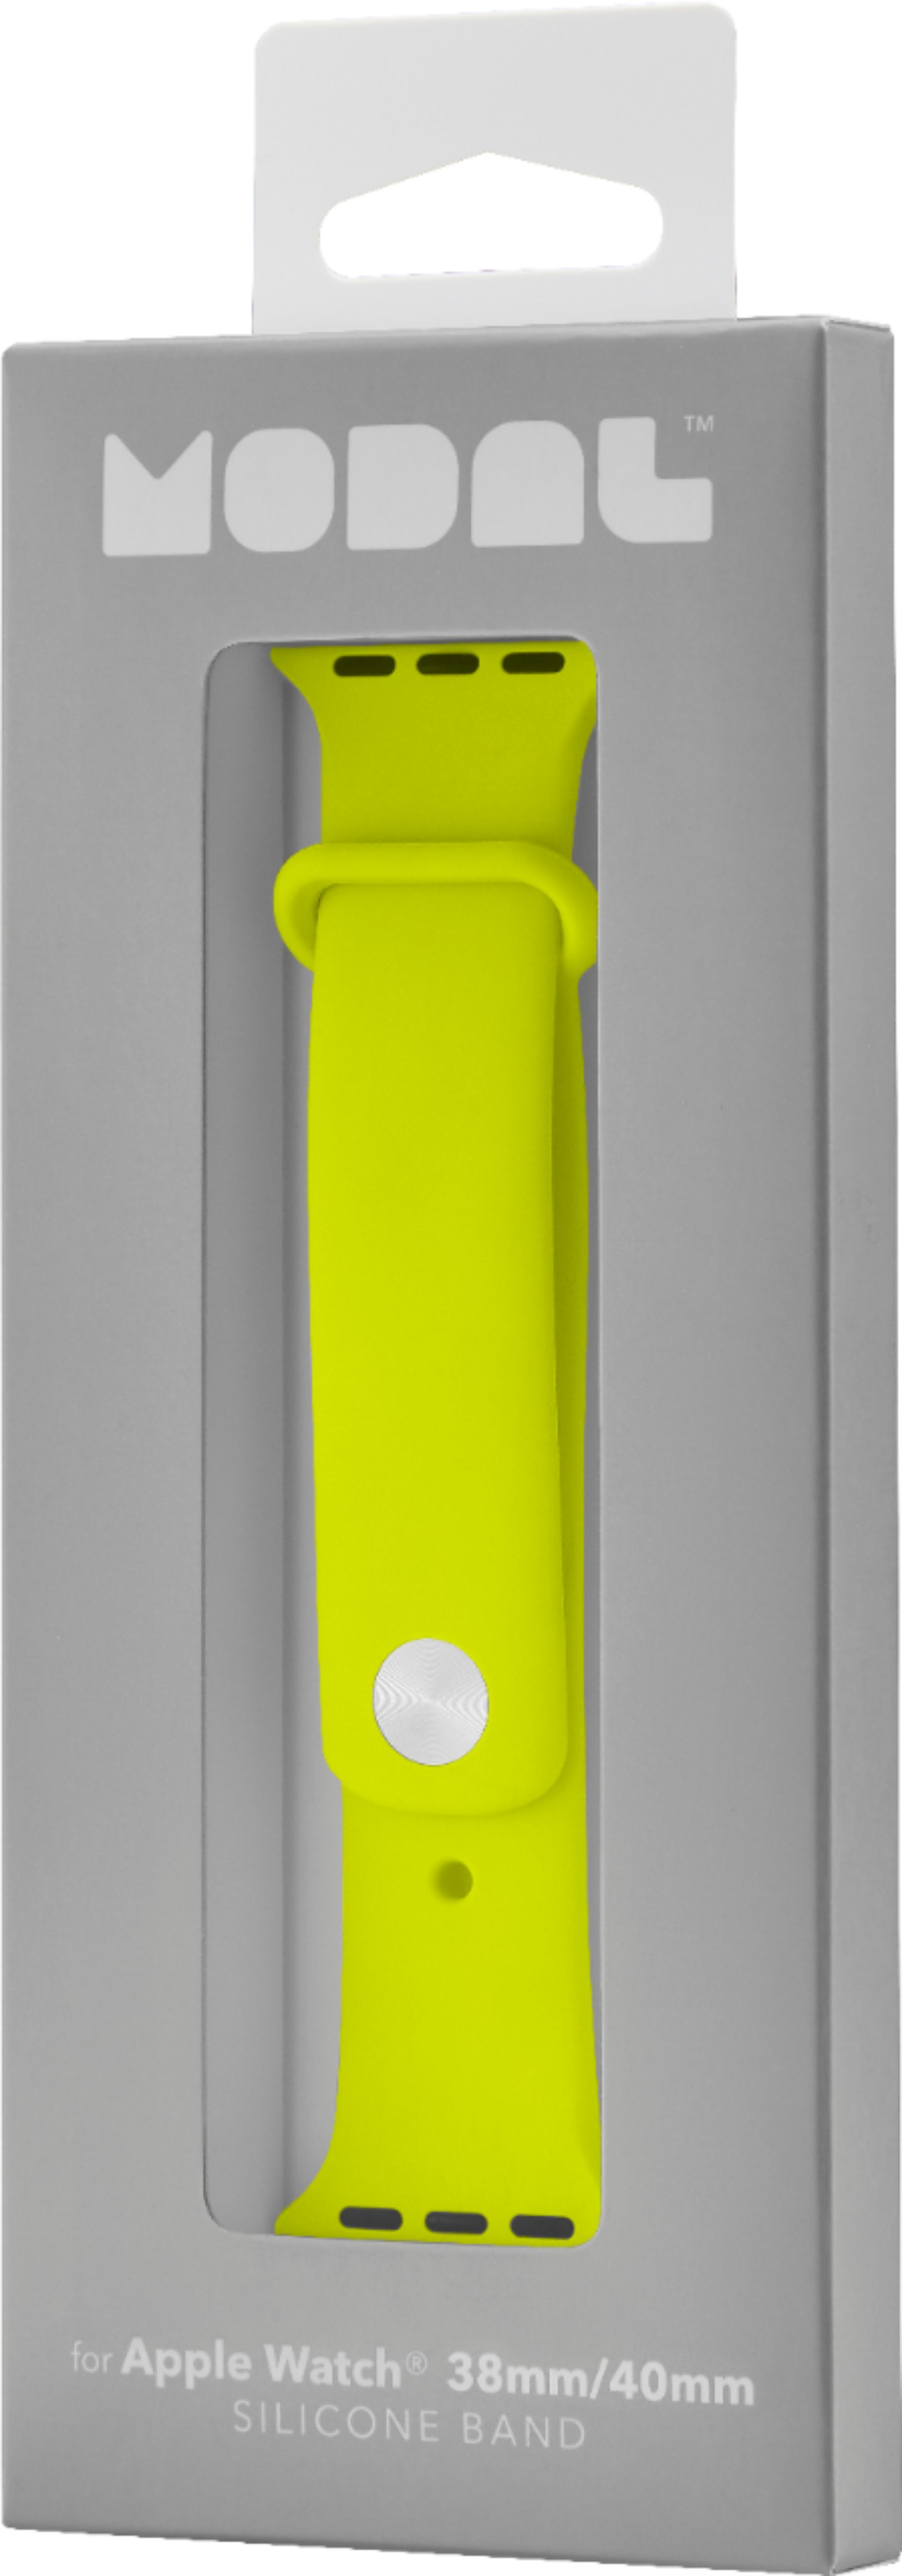 BOO' Neon Printed Silicone Smart Watch Band – Riley Reigh / Mod Market